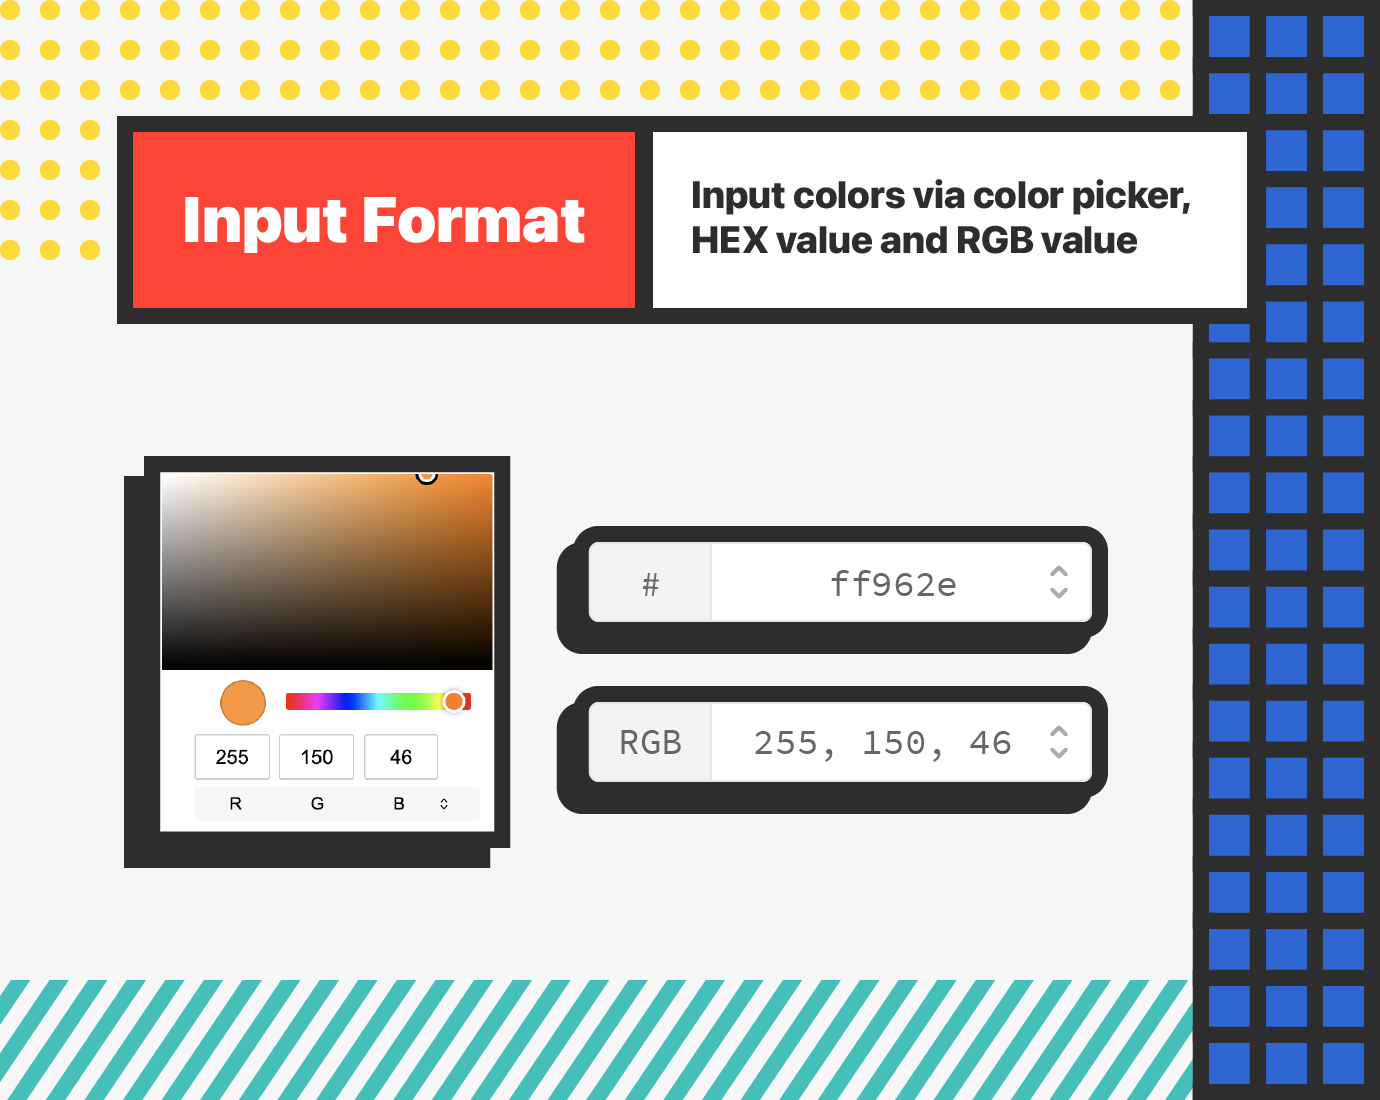 Feature 2 - Input Format: Input colors via color picker, HEX value and RGB value